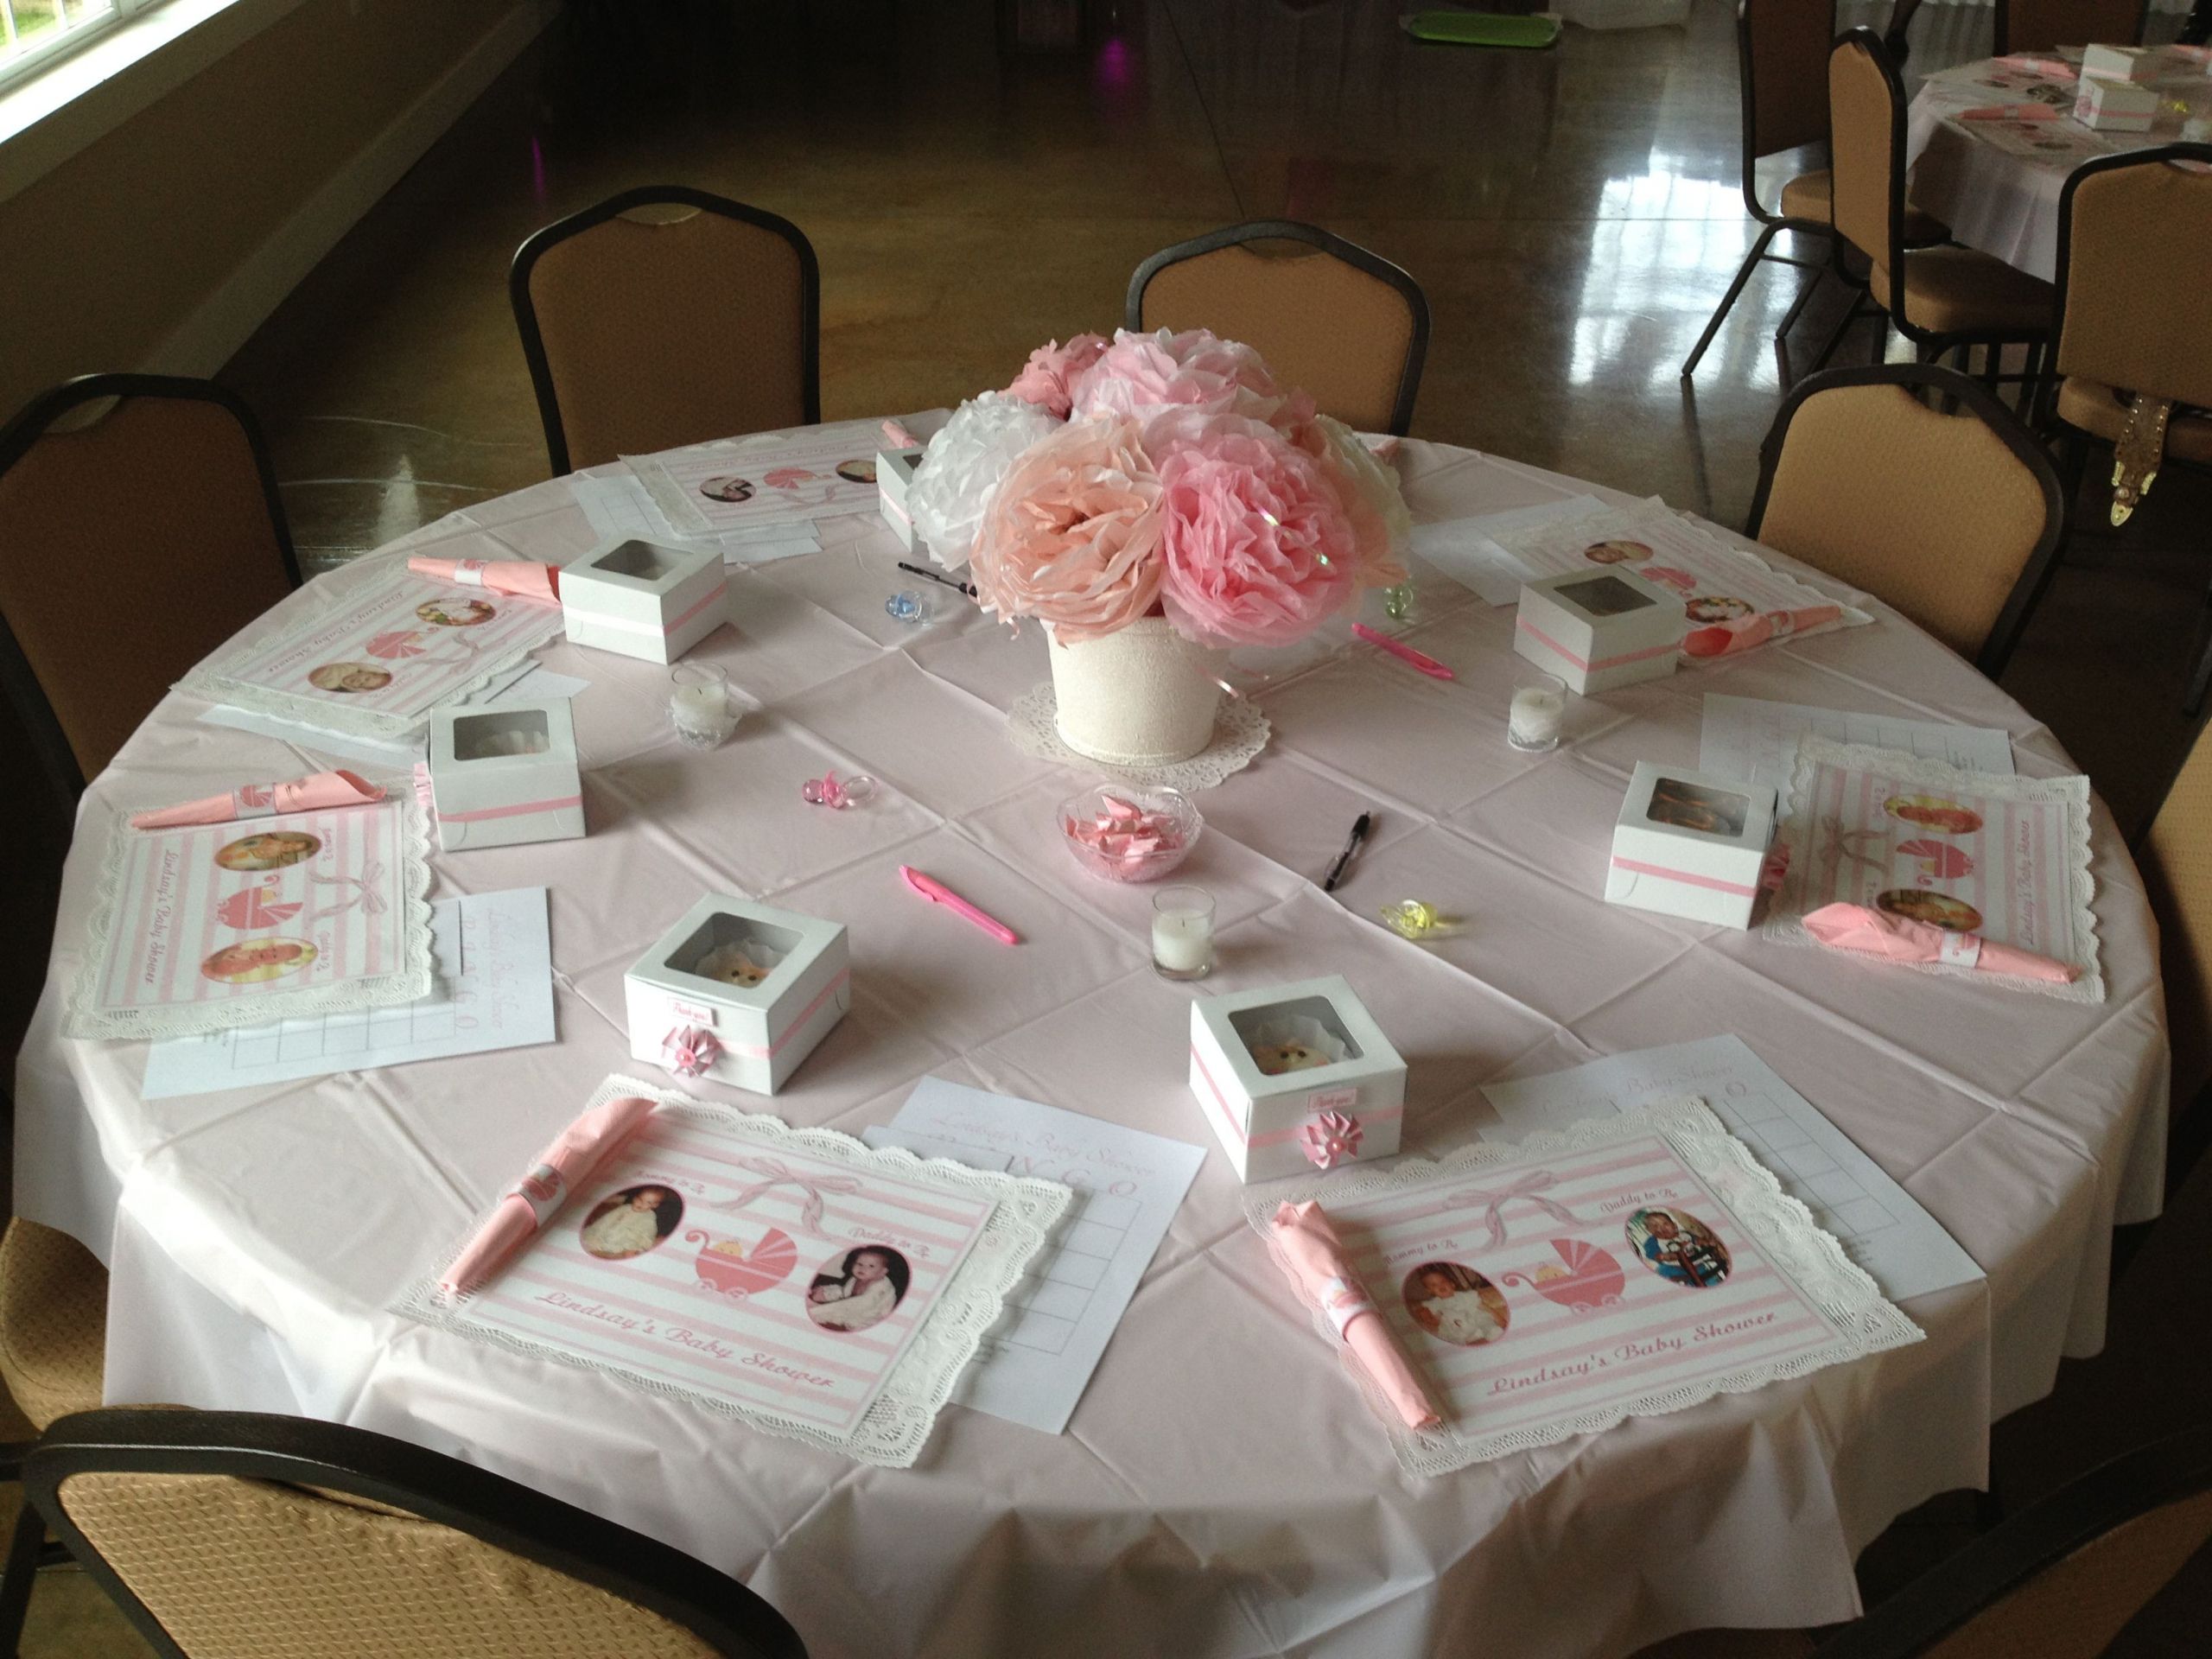 Baby Shower Decor Ideas For Tables
 BABY SHOWER table set up